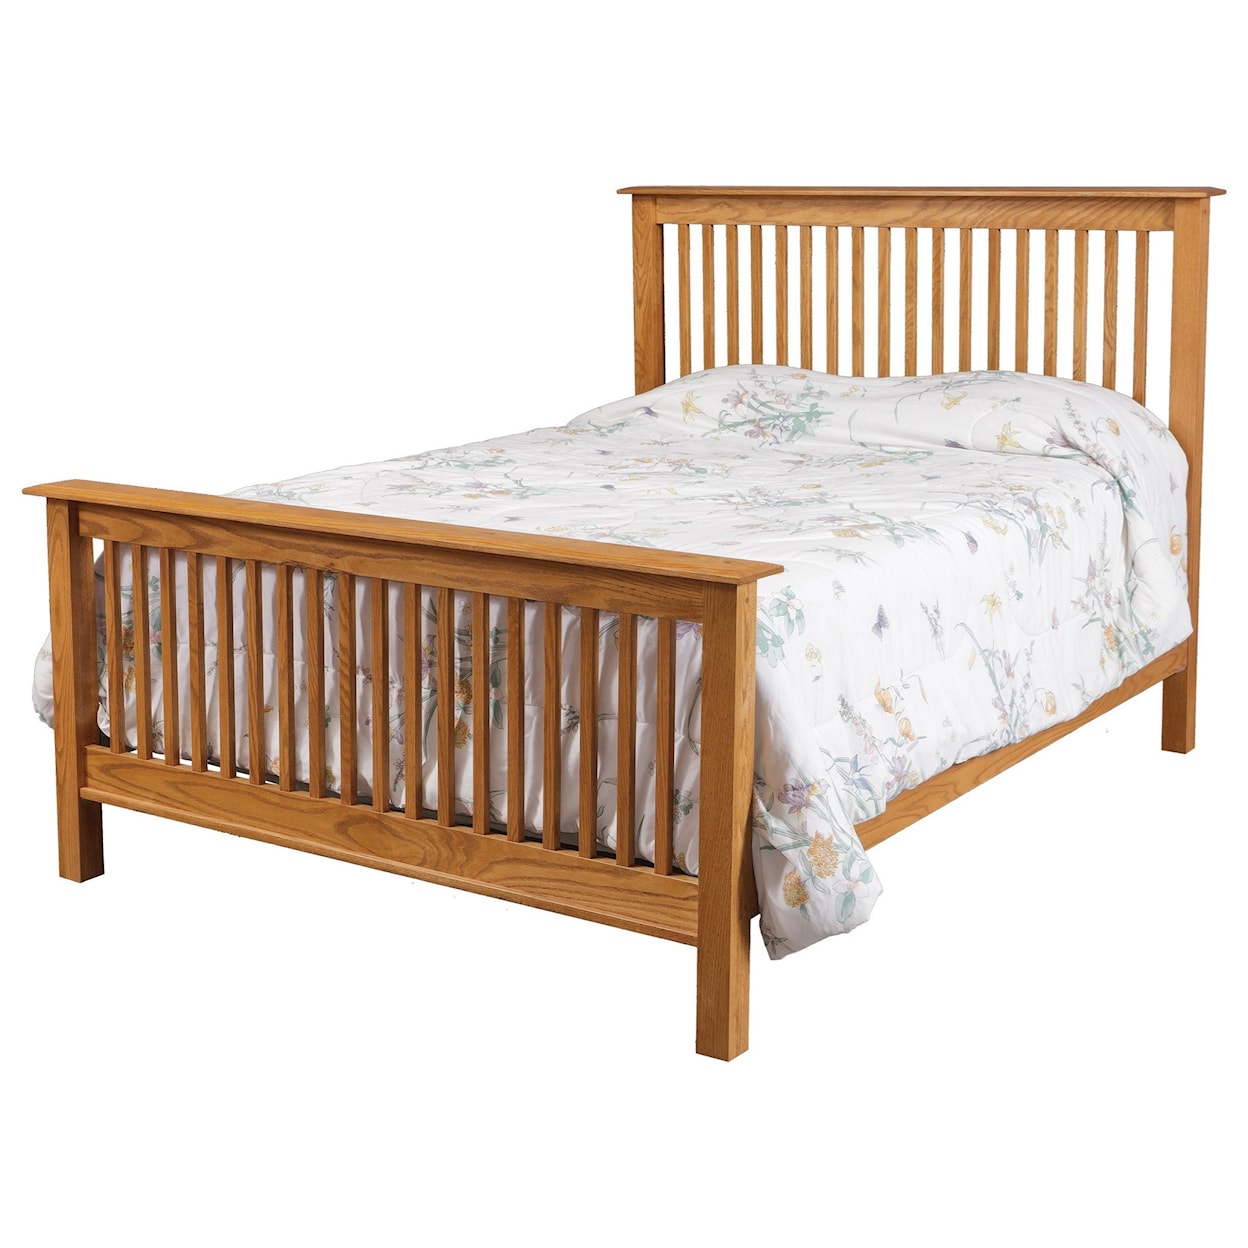 Daniel's Amish Simplicity Twin Bed